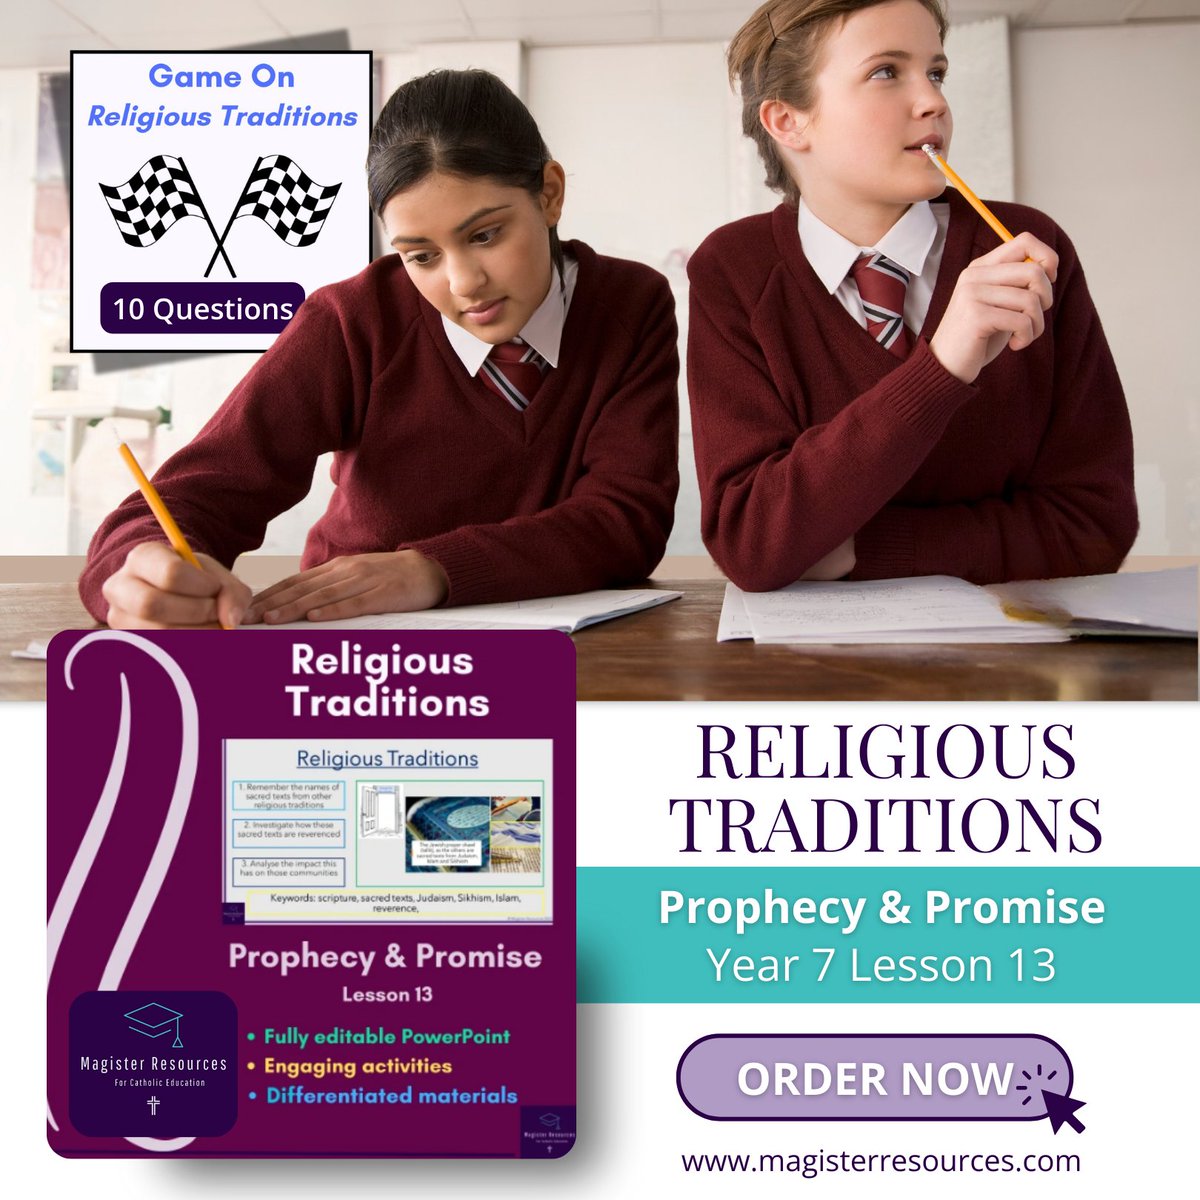 Add spark to teaching with our fun Religious Traditions lesson in Year 7's Prophecy & Promise package. Includes a 'Game On' activity where groups race to answer 10 questions first. 🏁 Order now: magisterresources.com/resources/ols/… #Year7Teachers #ReligiousTraditions